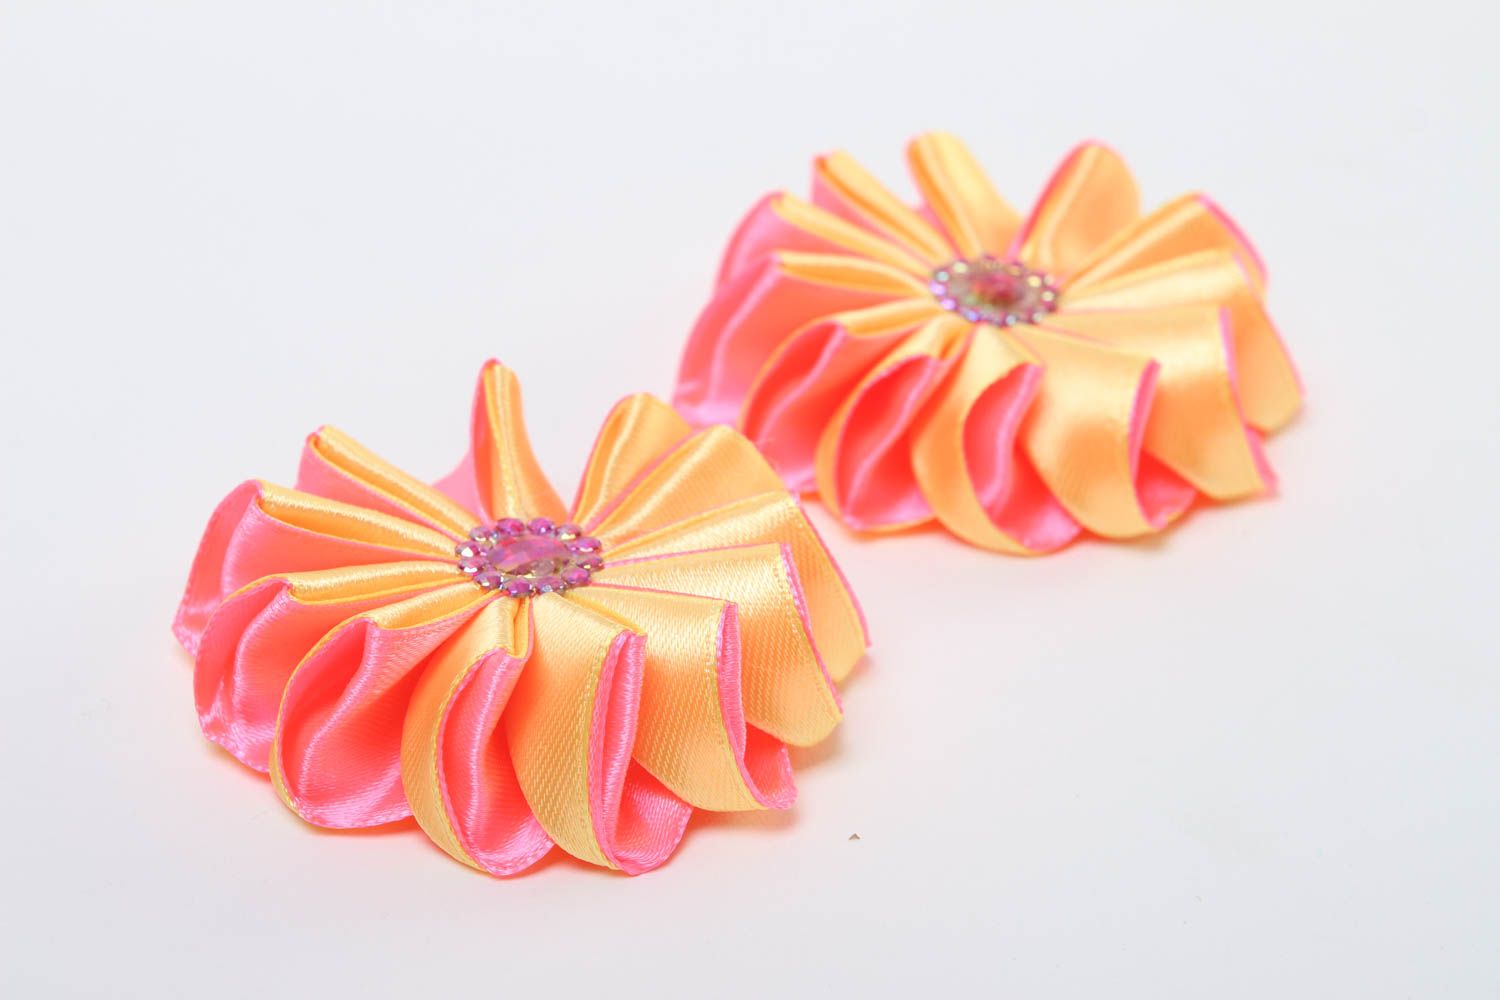 Kanzashi technique flowers of satin ribbons unusual flowers fittings for jewelry photo 3